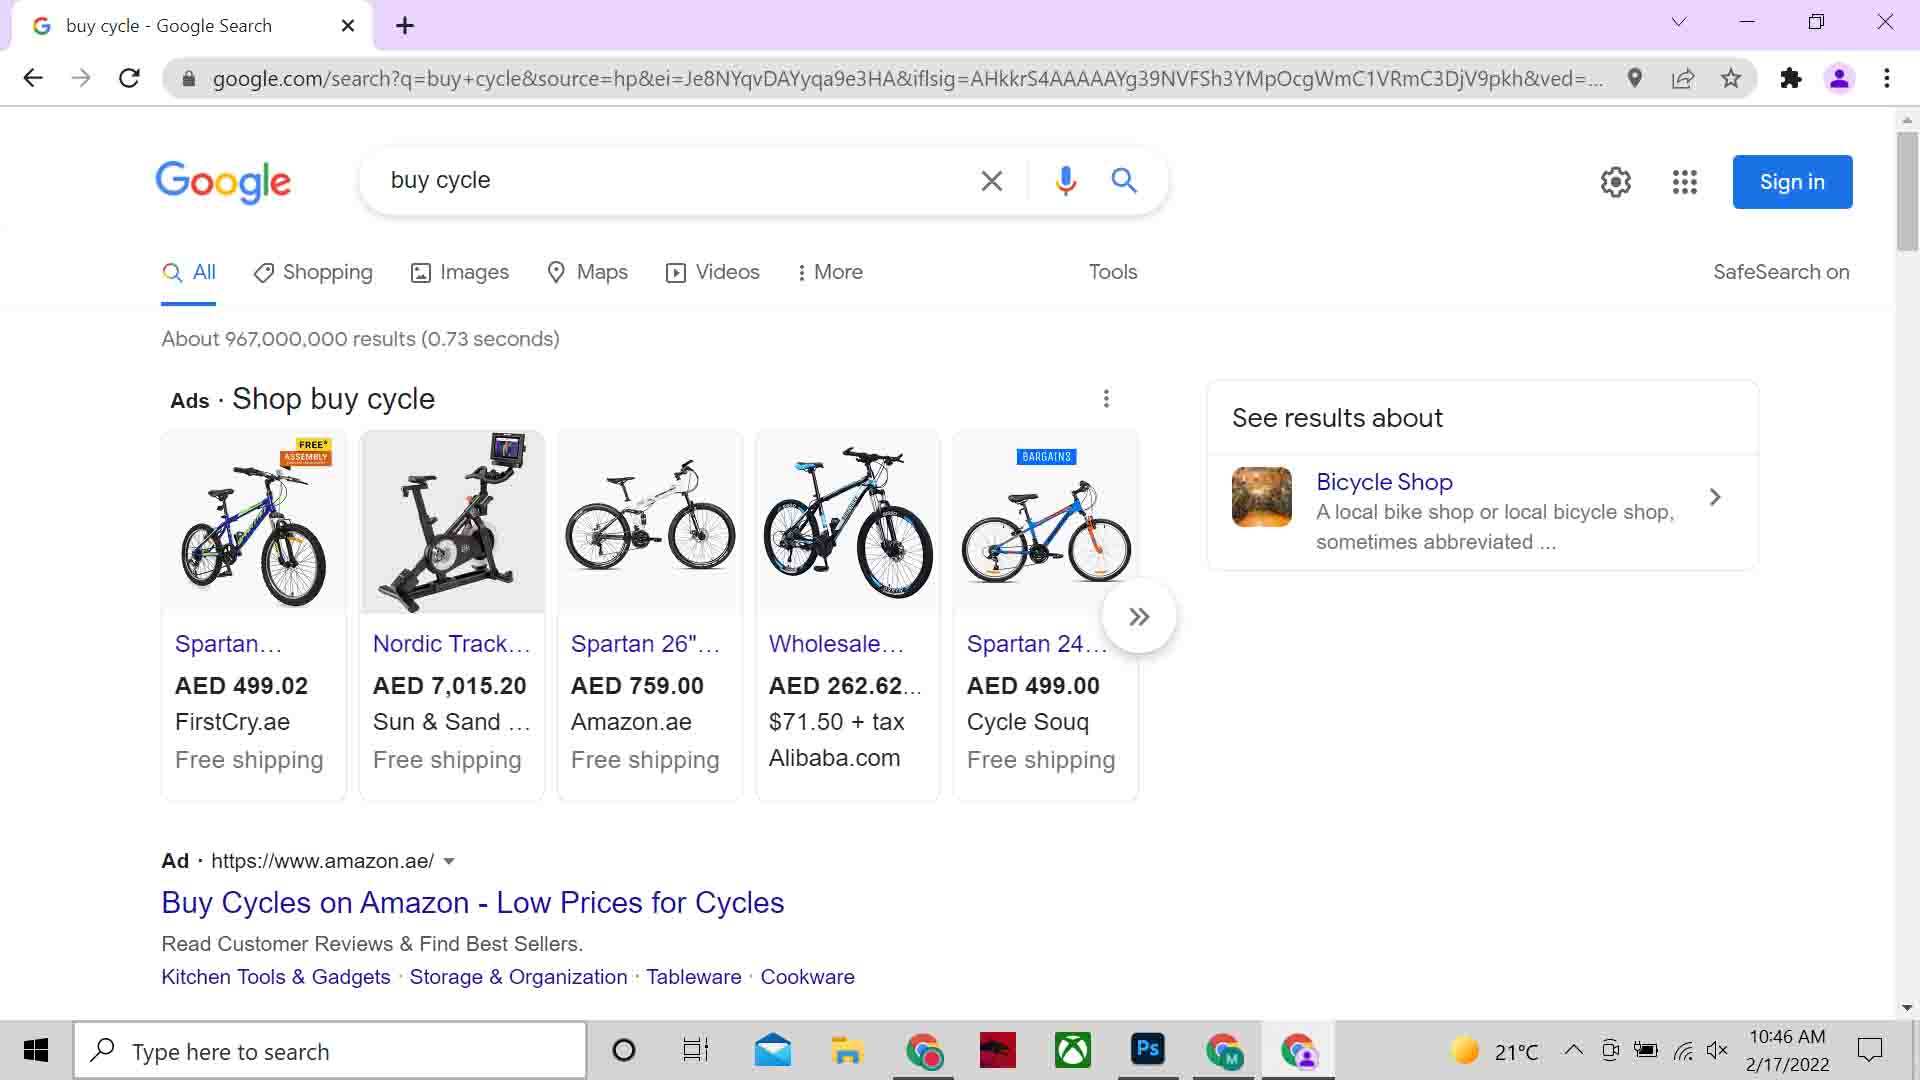 Google Shopping search results